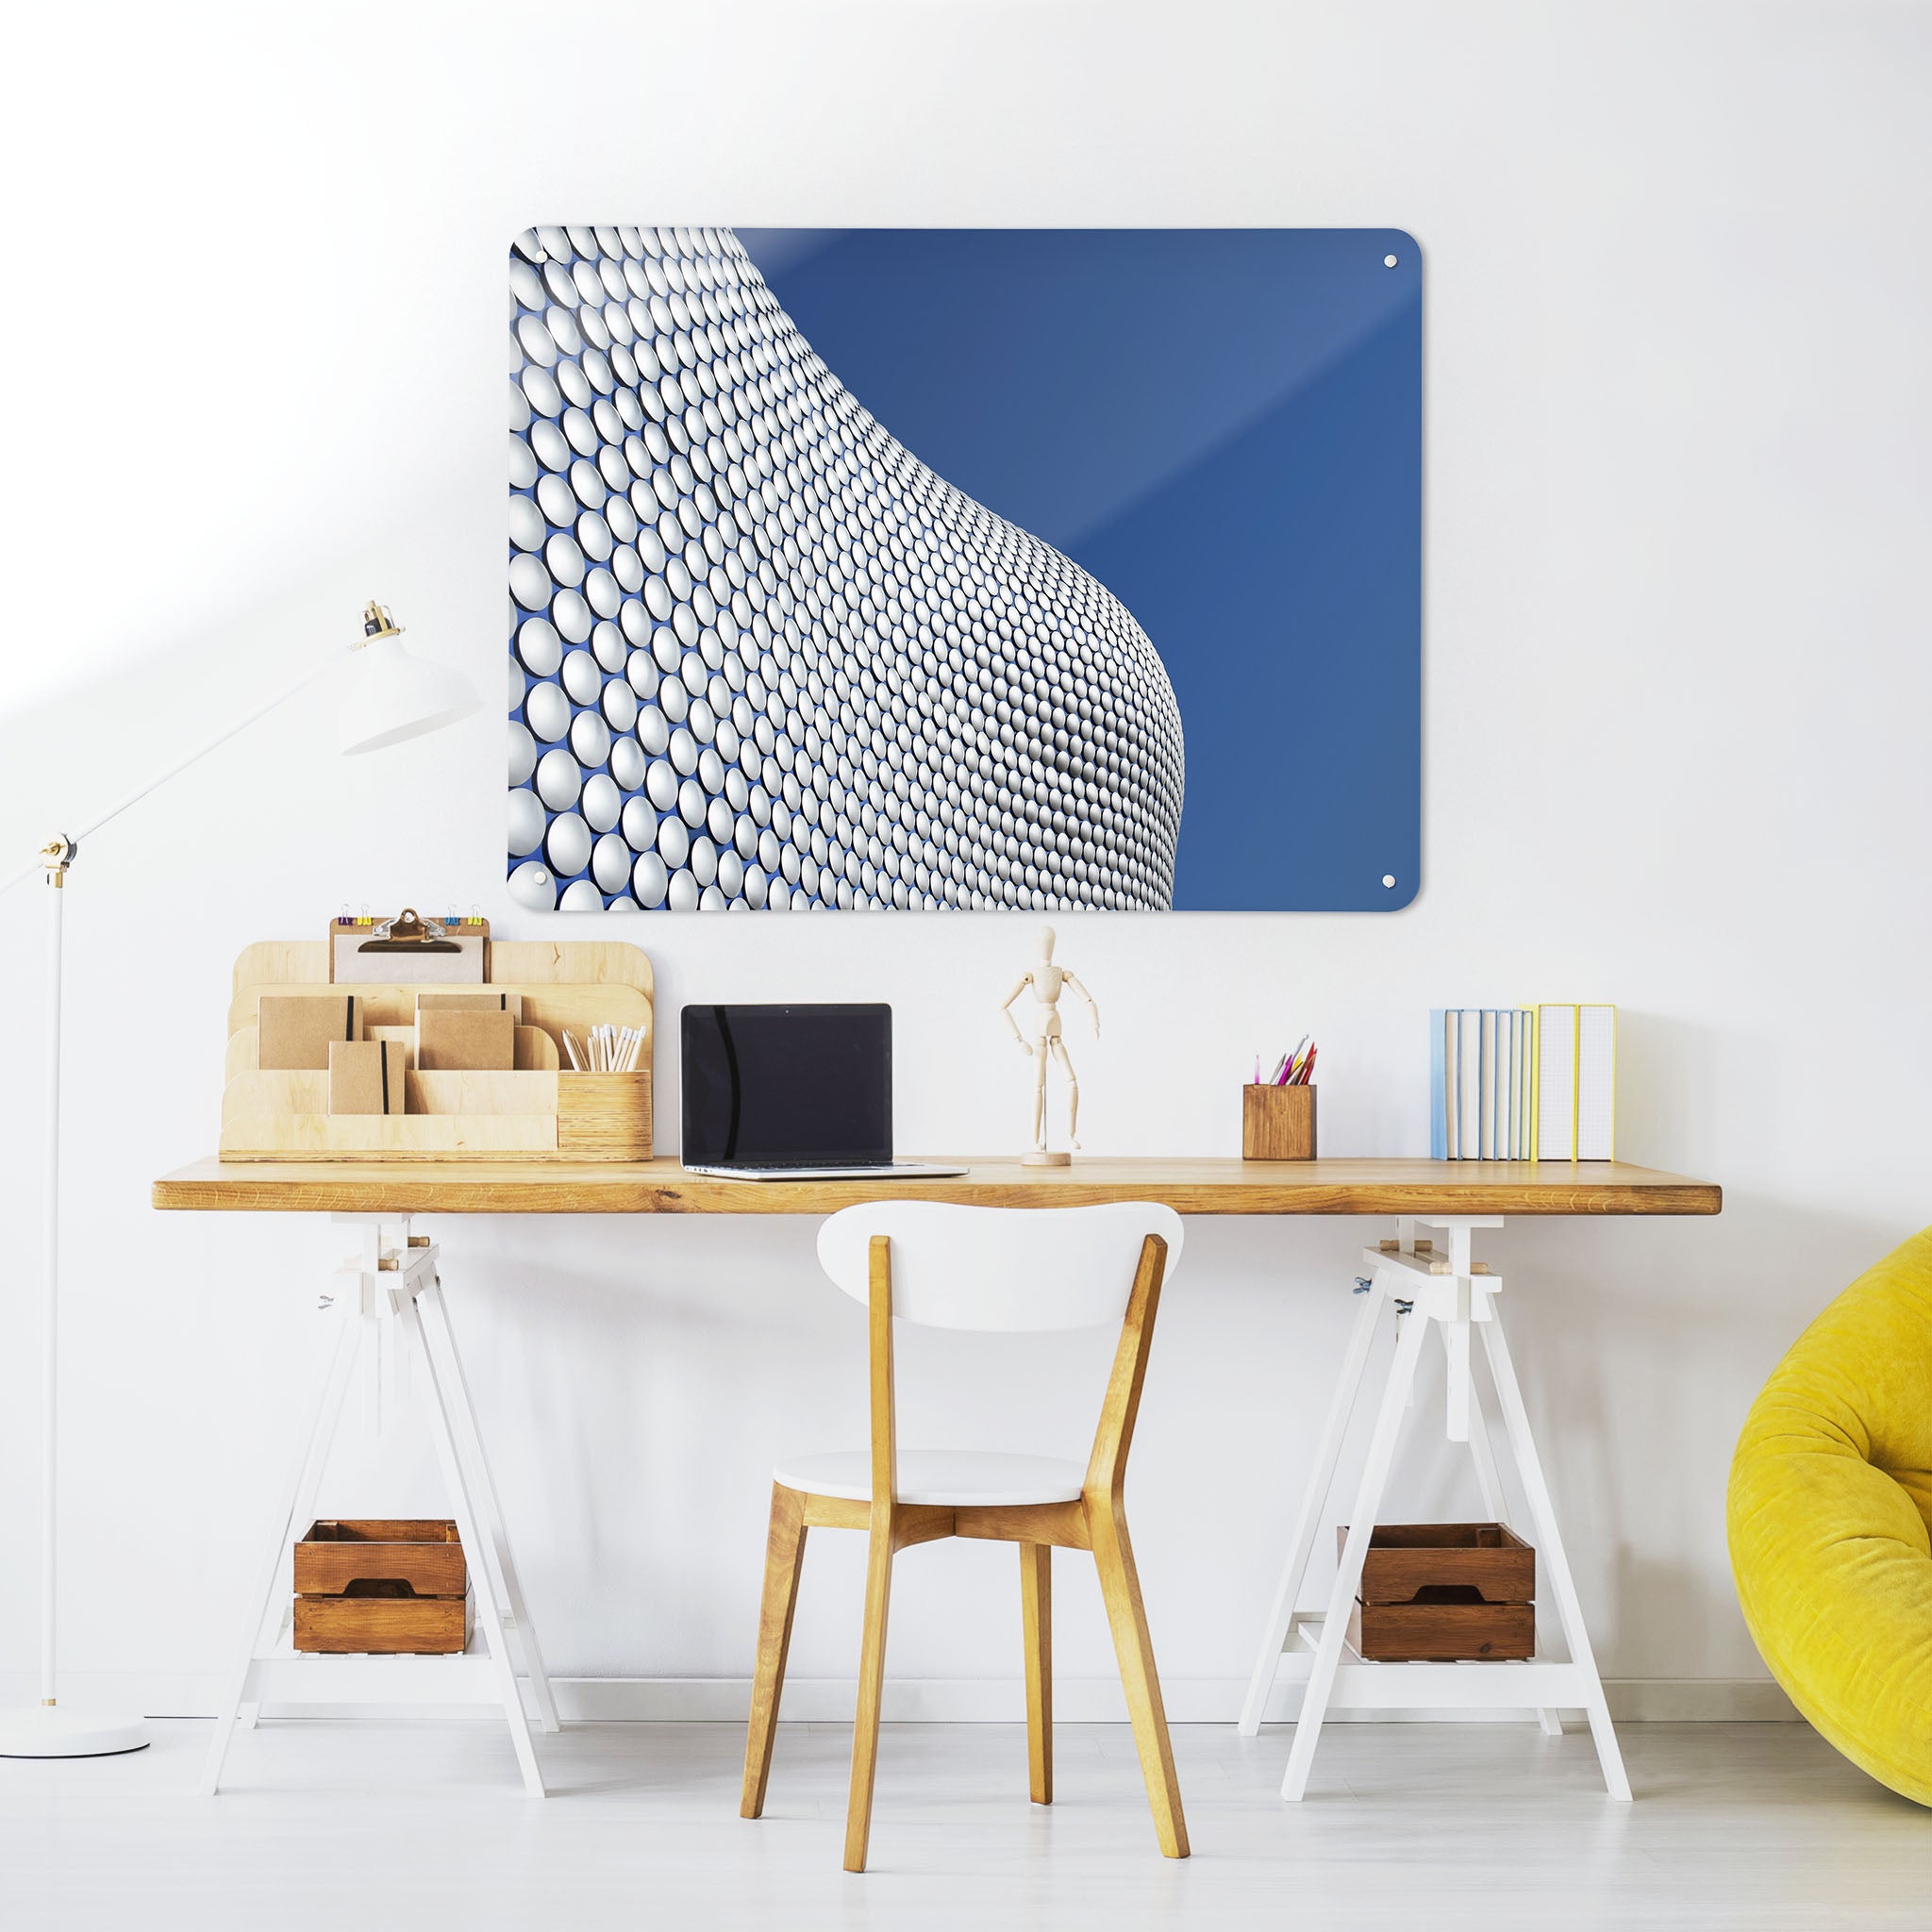 A desk in a workspace setting in a white interior with a magnetic metal wall art panel showing a photograph of the Selfridges Building Birmingham